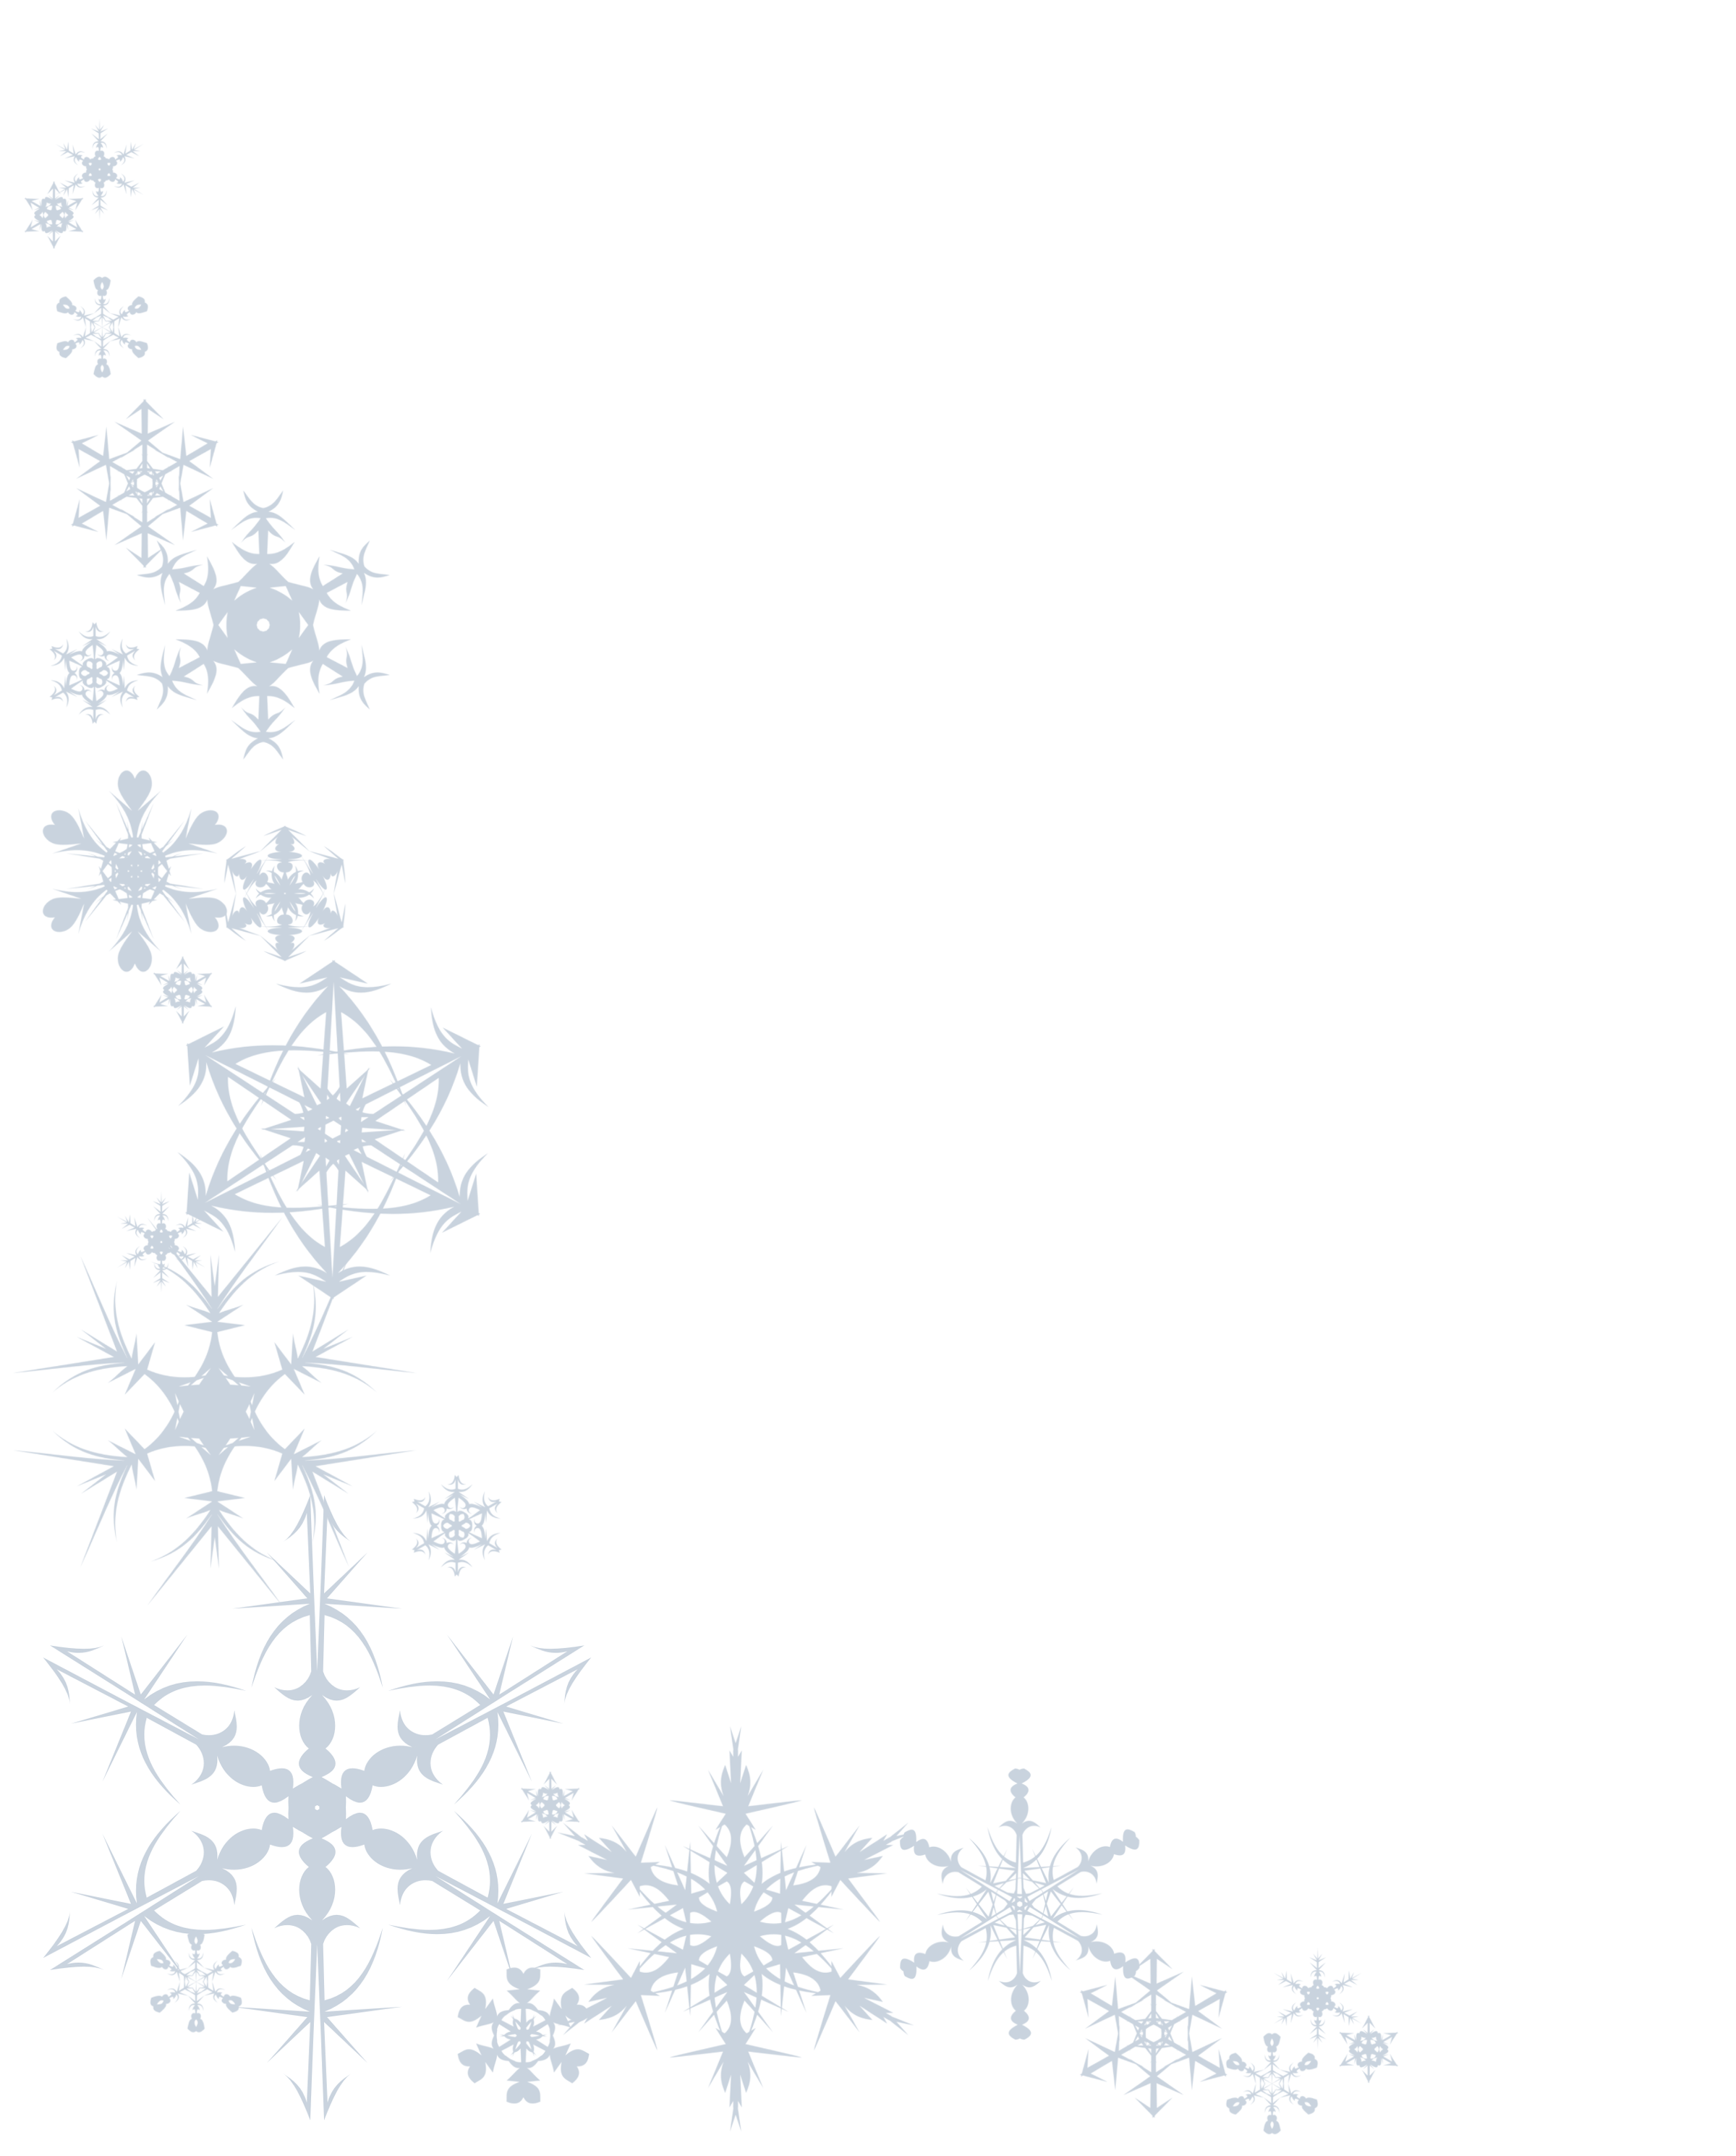 5 Best Images of Free Printable Snow Borders Snowflake Border Clip